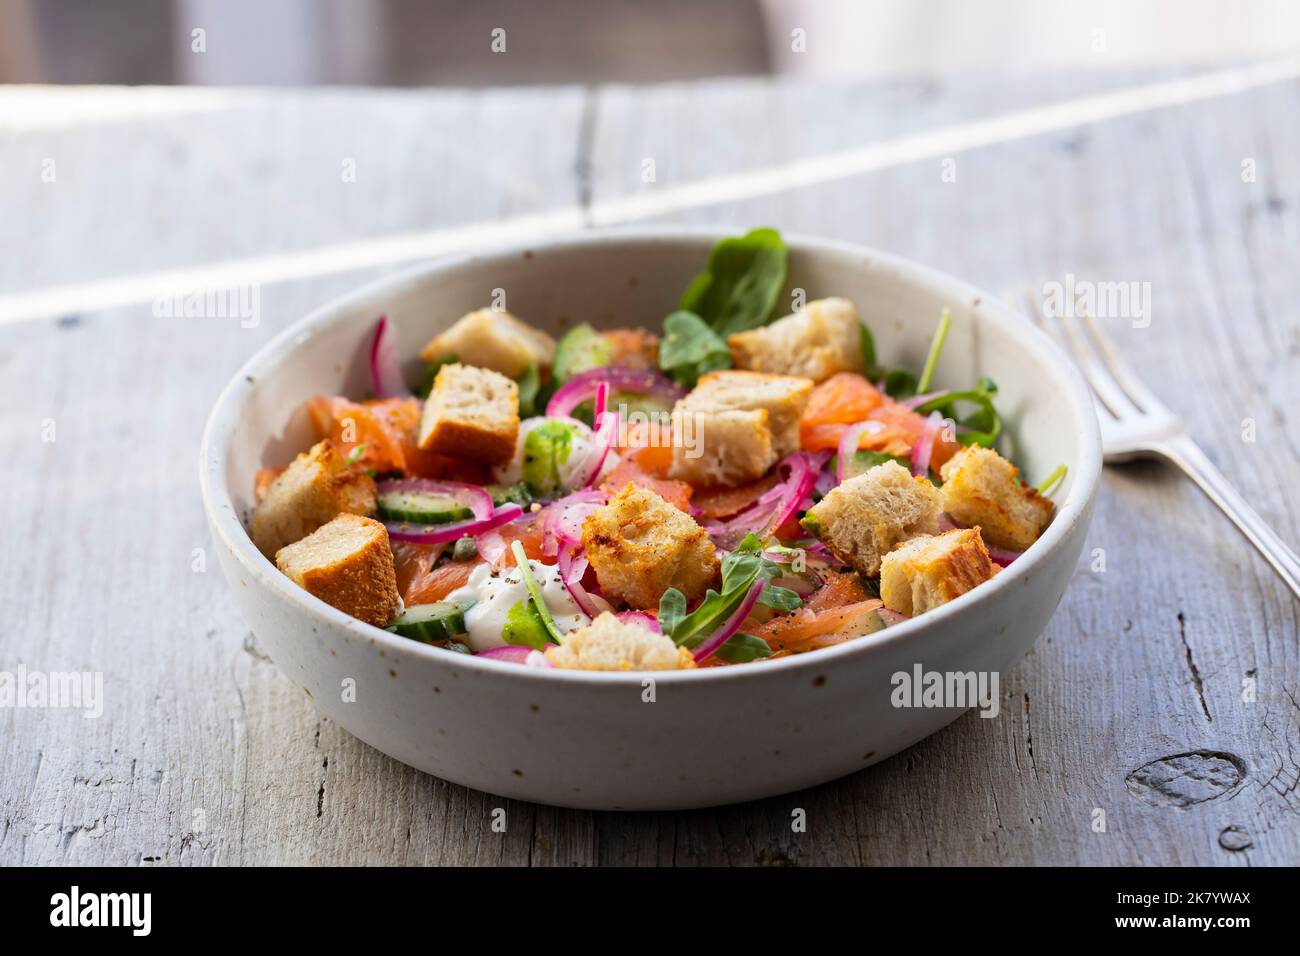 Salad with smoked salmon, pickled onions and croutons Stock Photo